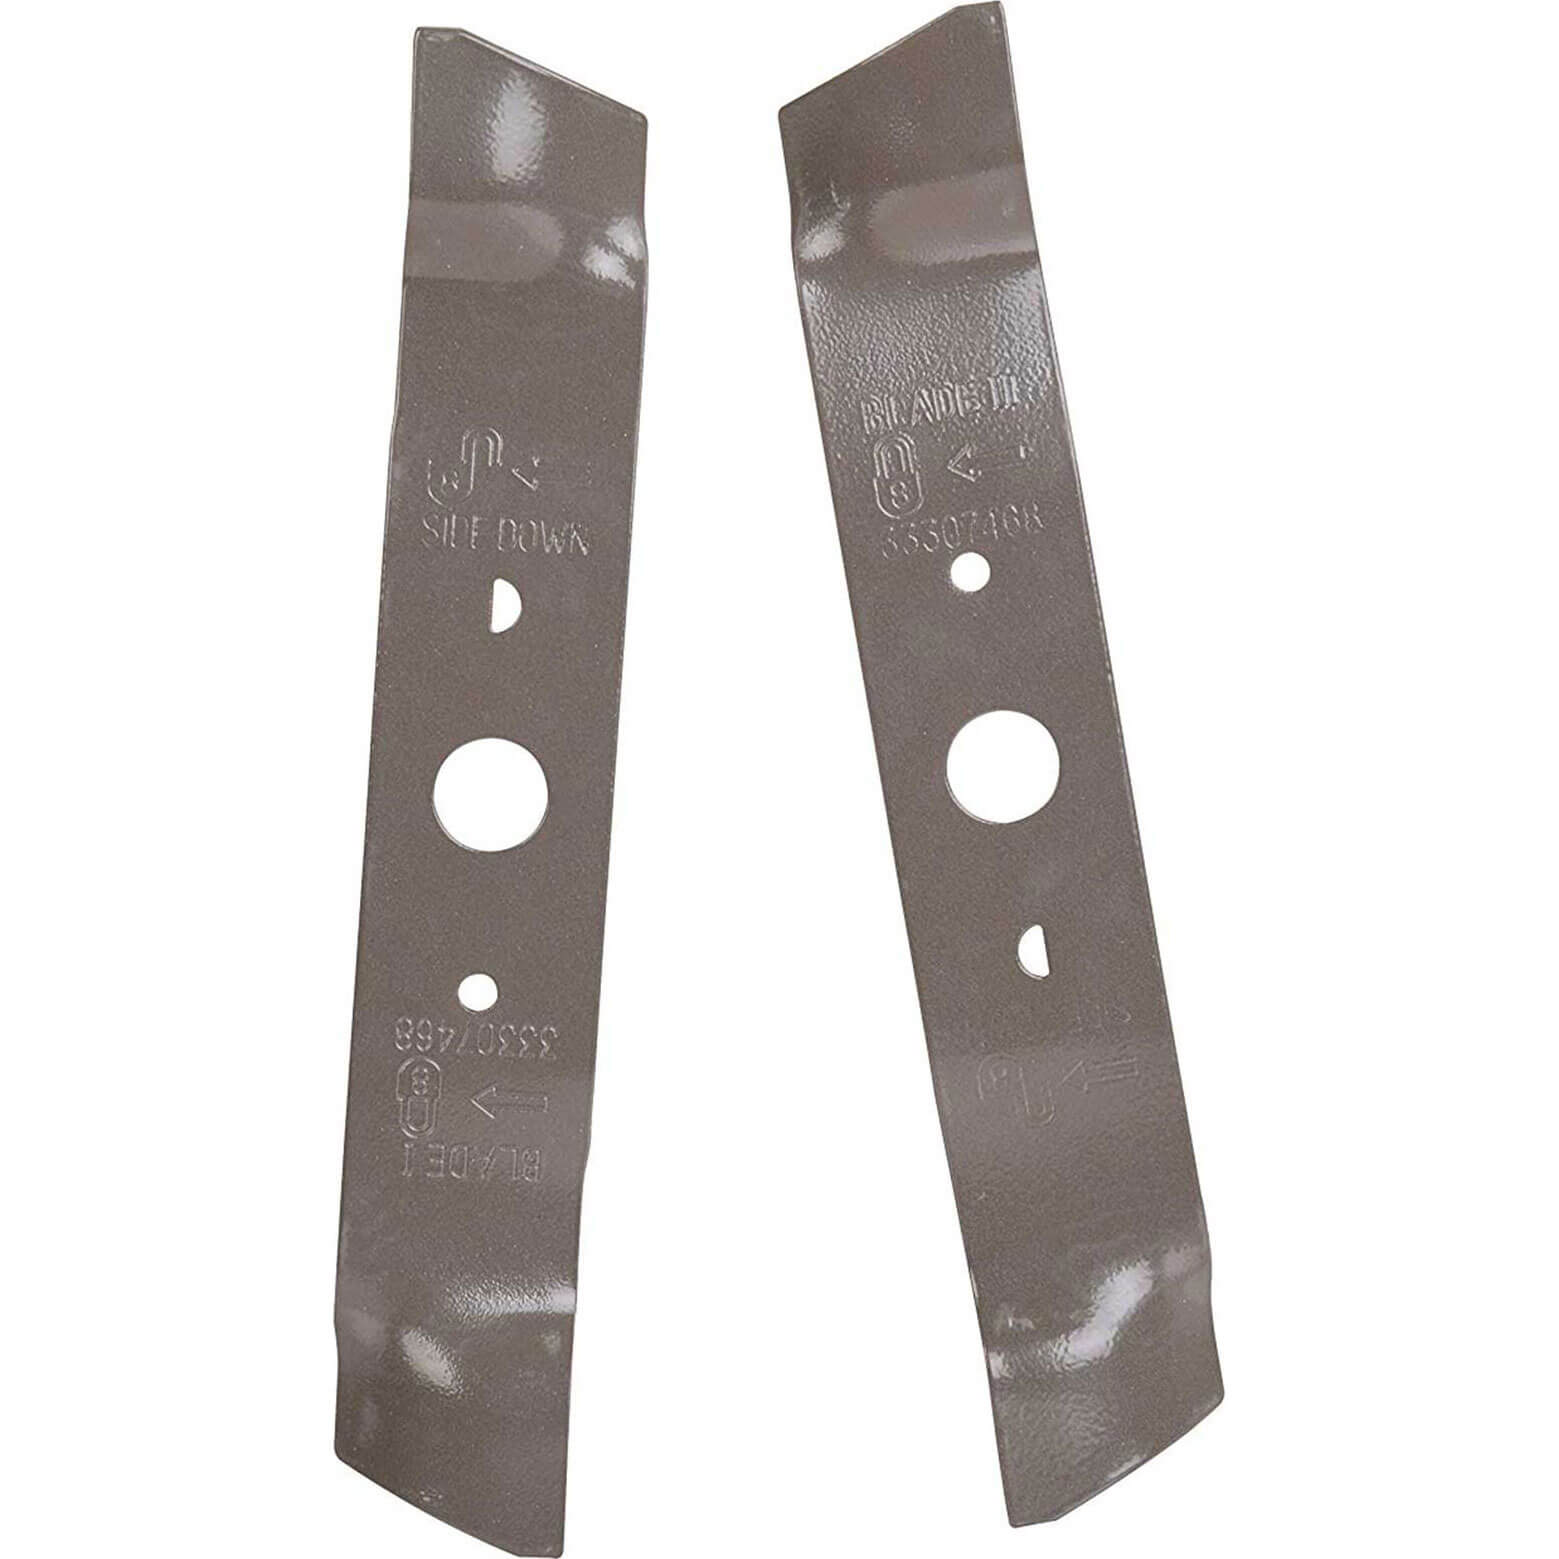 Photo of Greenworks Genuine Lawnmower Blades For G40lm49db Pack Of 2